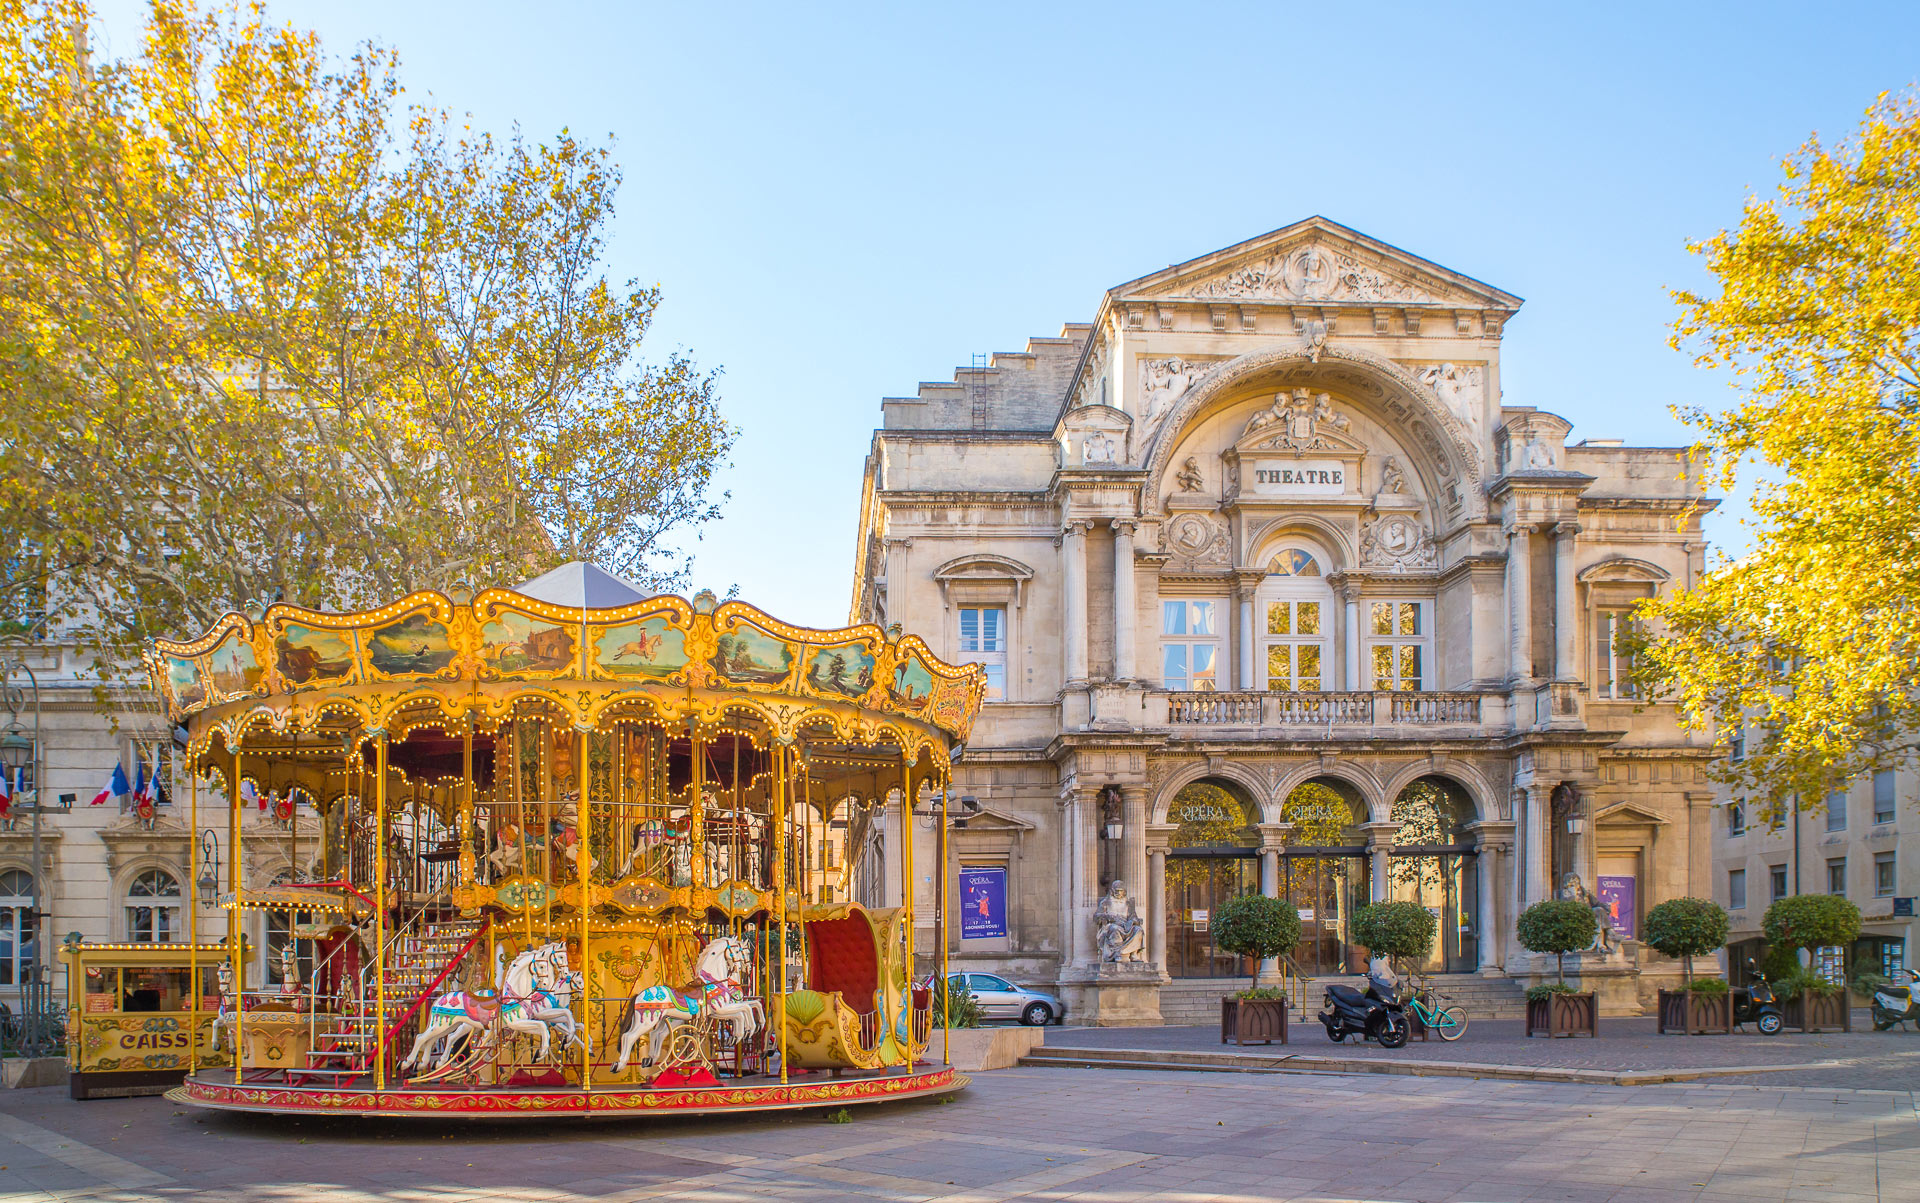  things to do in Avignon